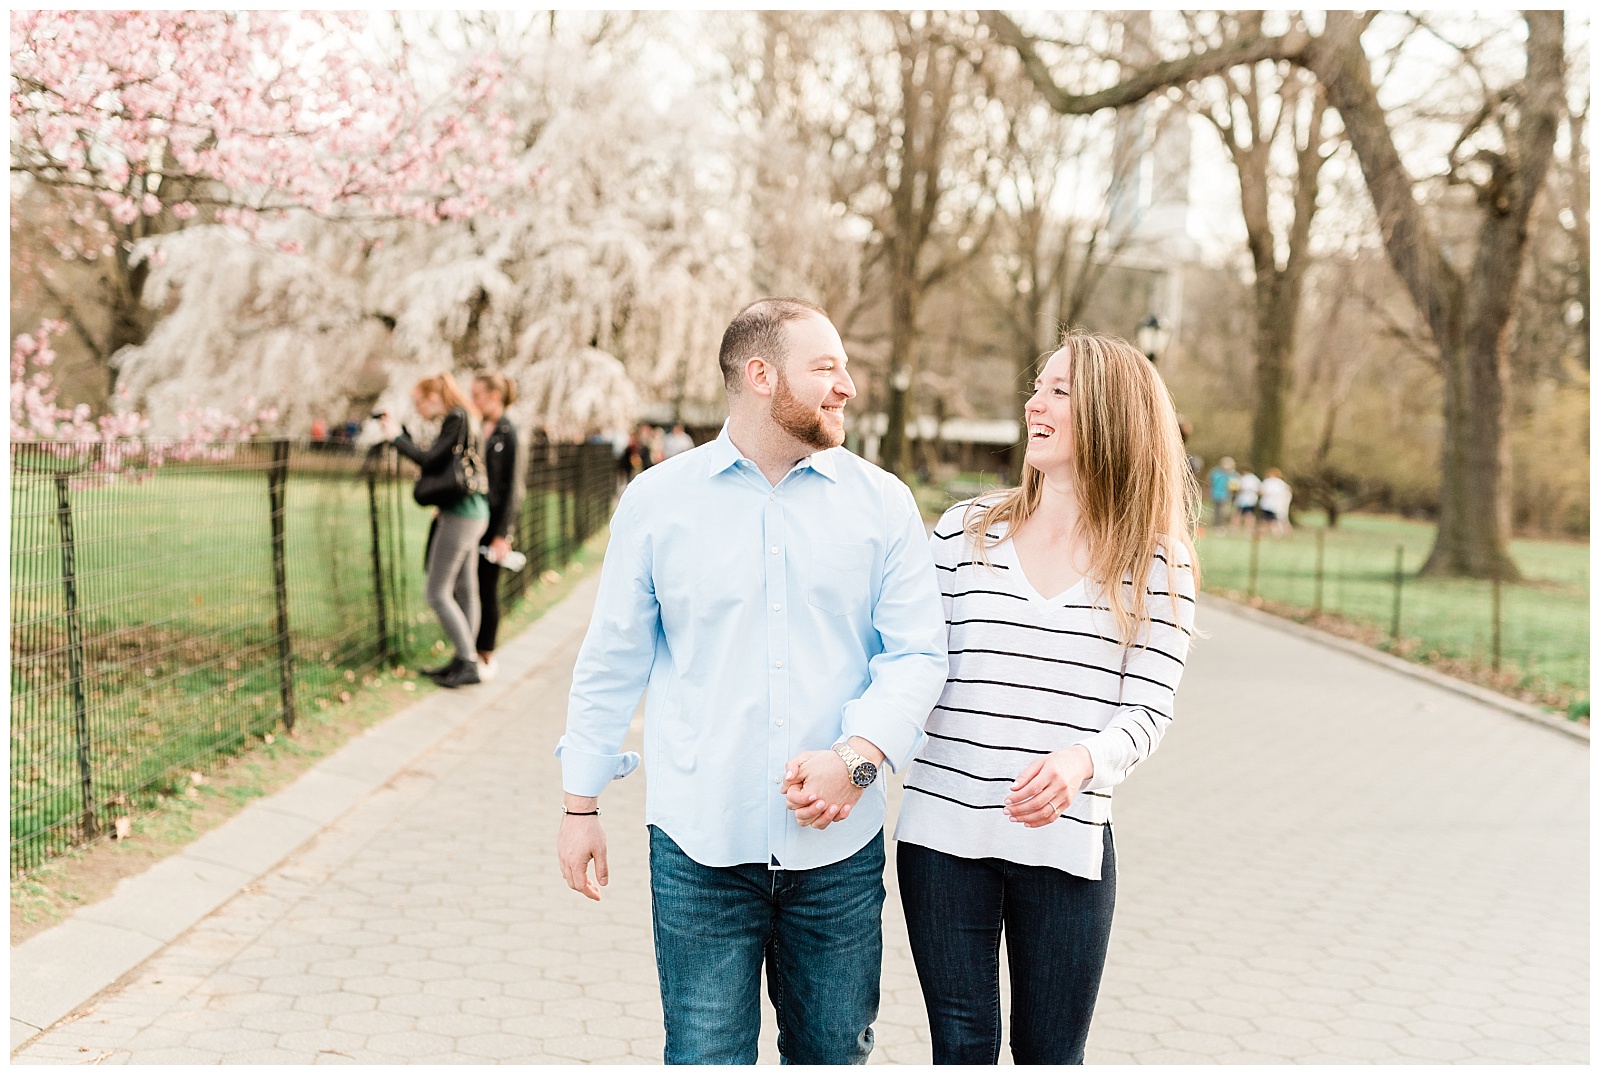 Central Park, NYC engagement session, springtime, wedding photographer, New York, laughing